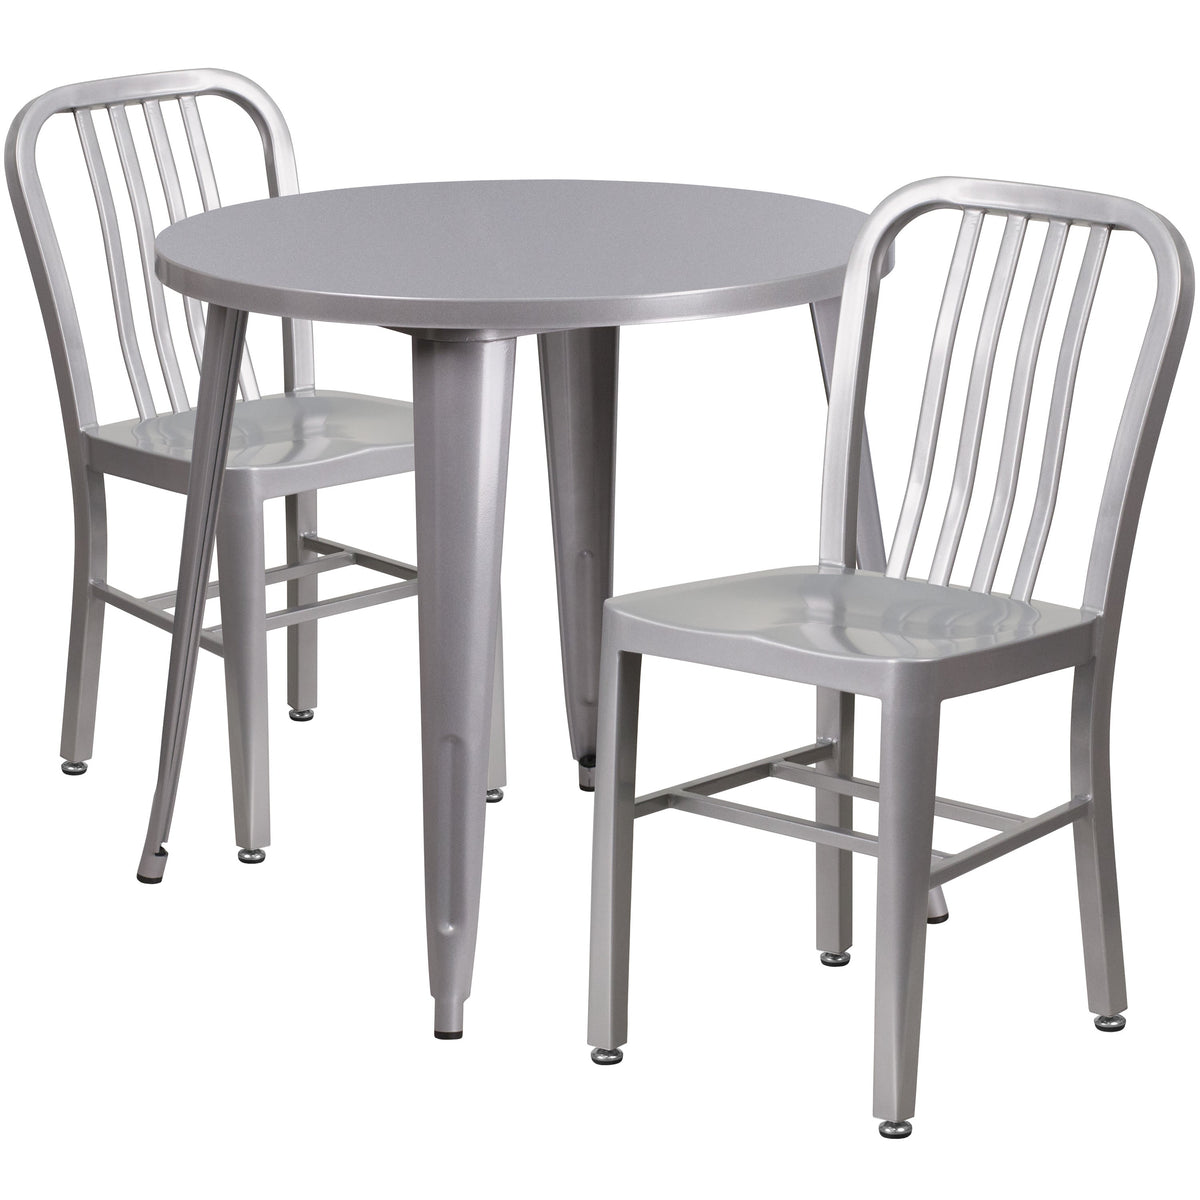 Silver |#| 30inch Round Silver Metal Indoor-Outdoor Table Set with 2 Vertical Slat Back Chairs